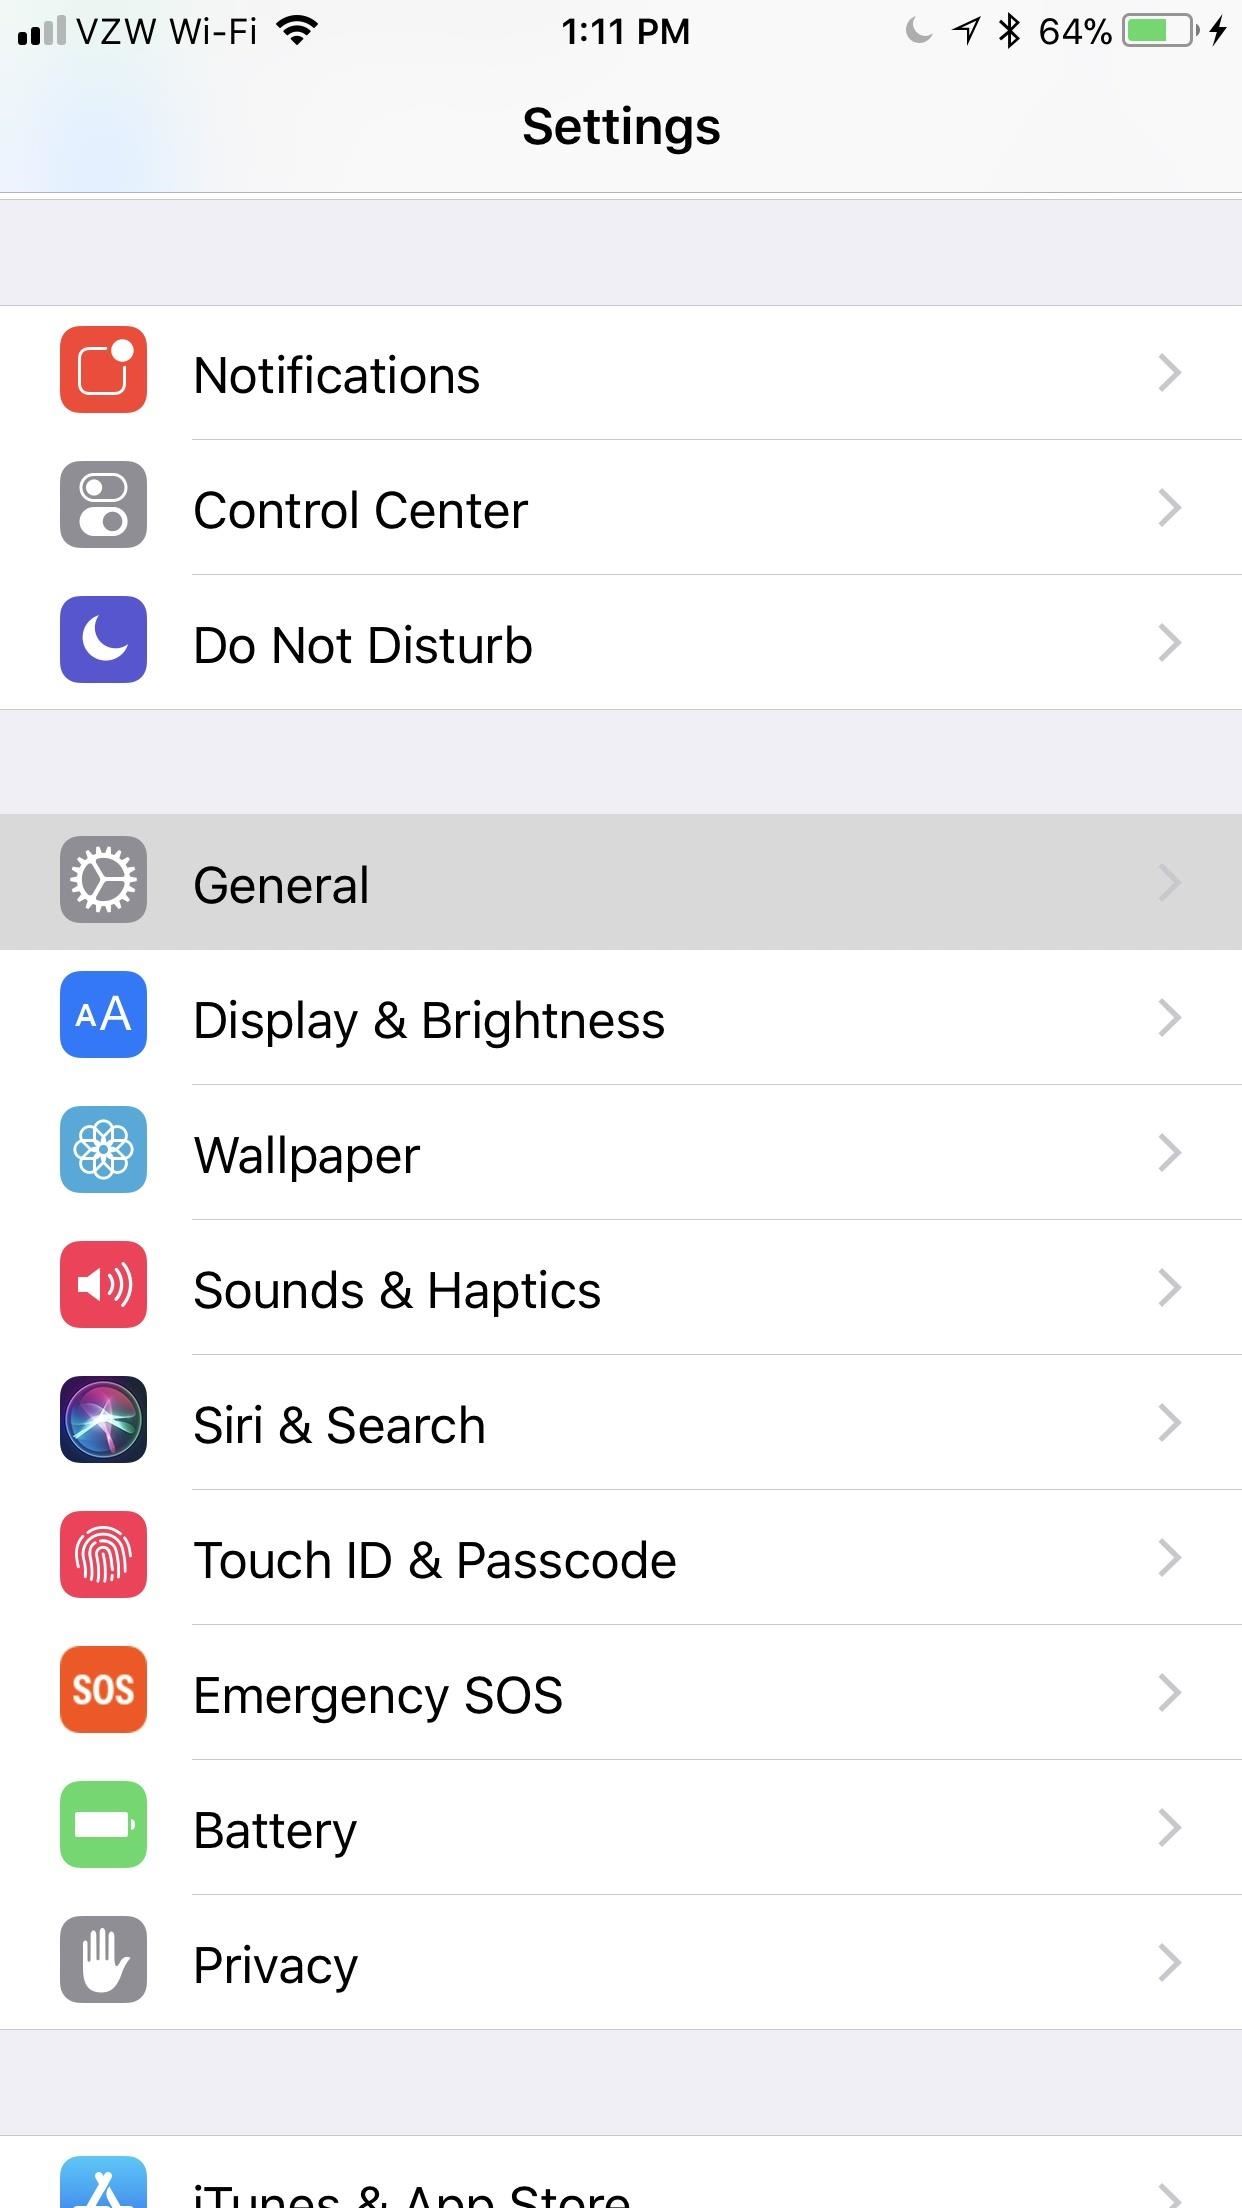 How to Use Keyboard Shortcuts to Type Long Words & Phrases Faster on Your iPhone